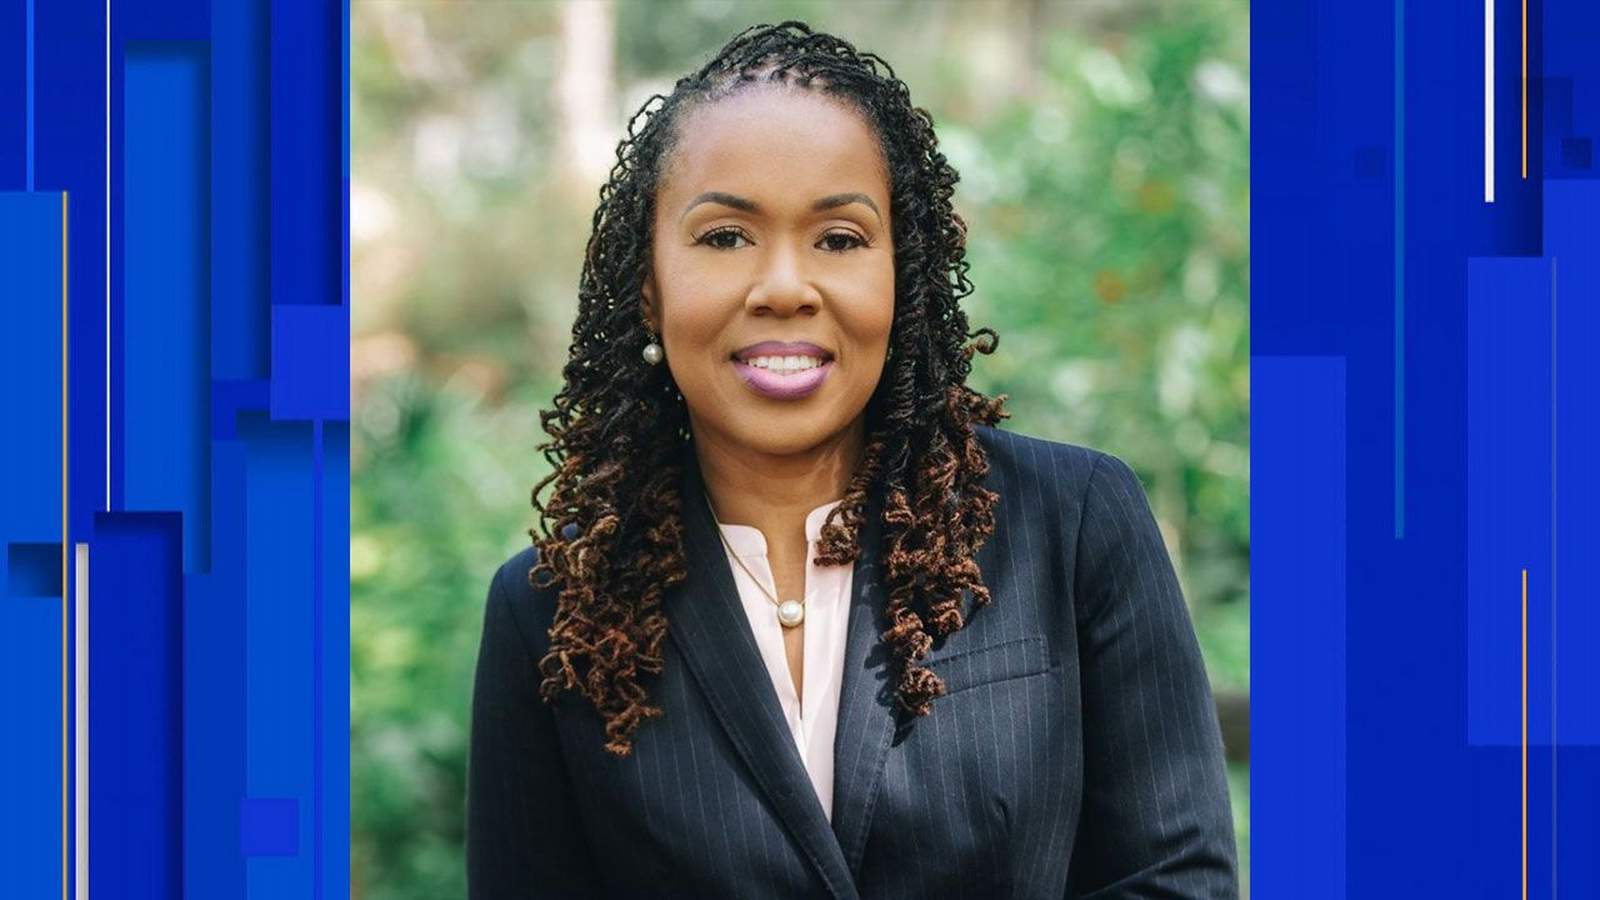 Orange-Osceola State Attorney candidate Monique Worrell wants to change the culture of prosecution